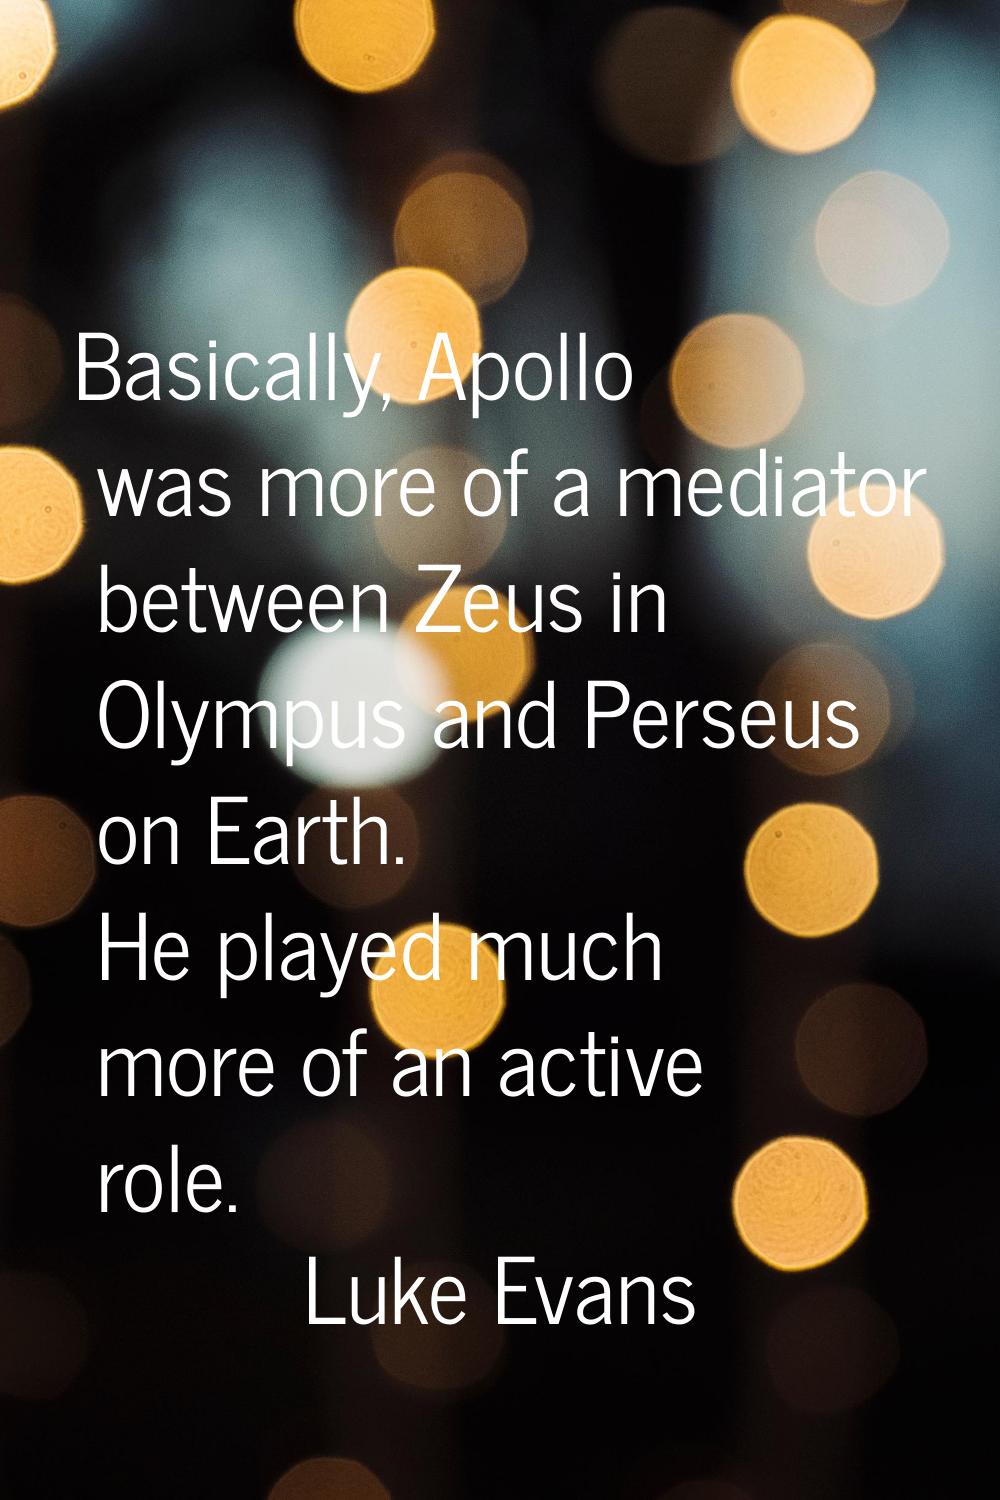 Basically, Apollo was more of a mediator between Zeus in Olympus and Perseus on Earth. He played mu